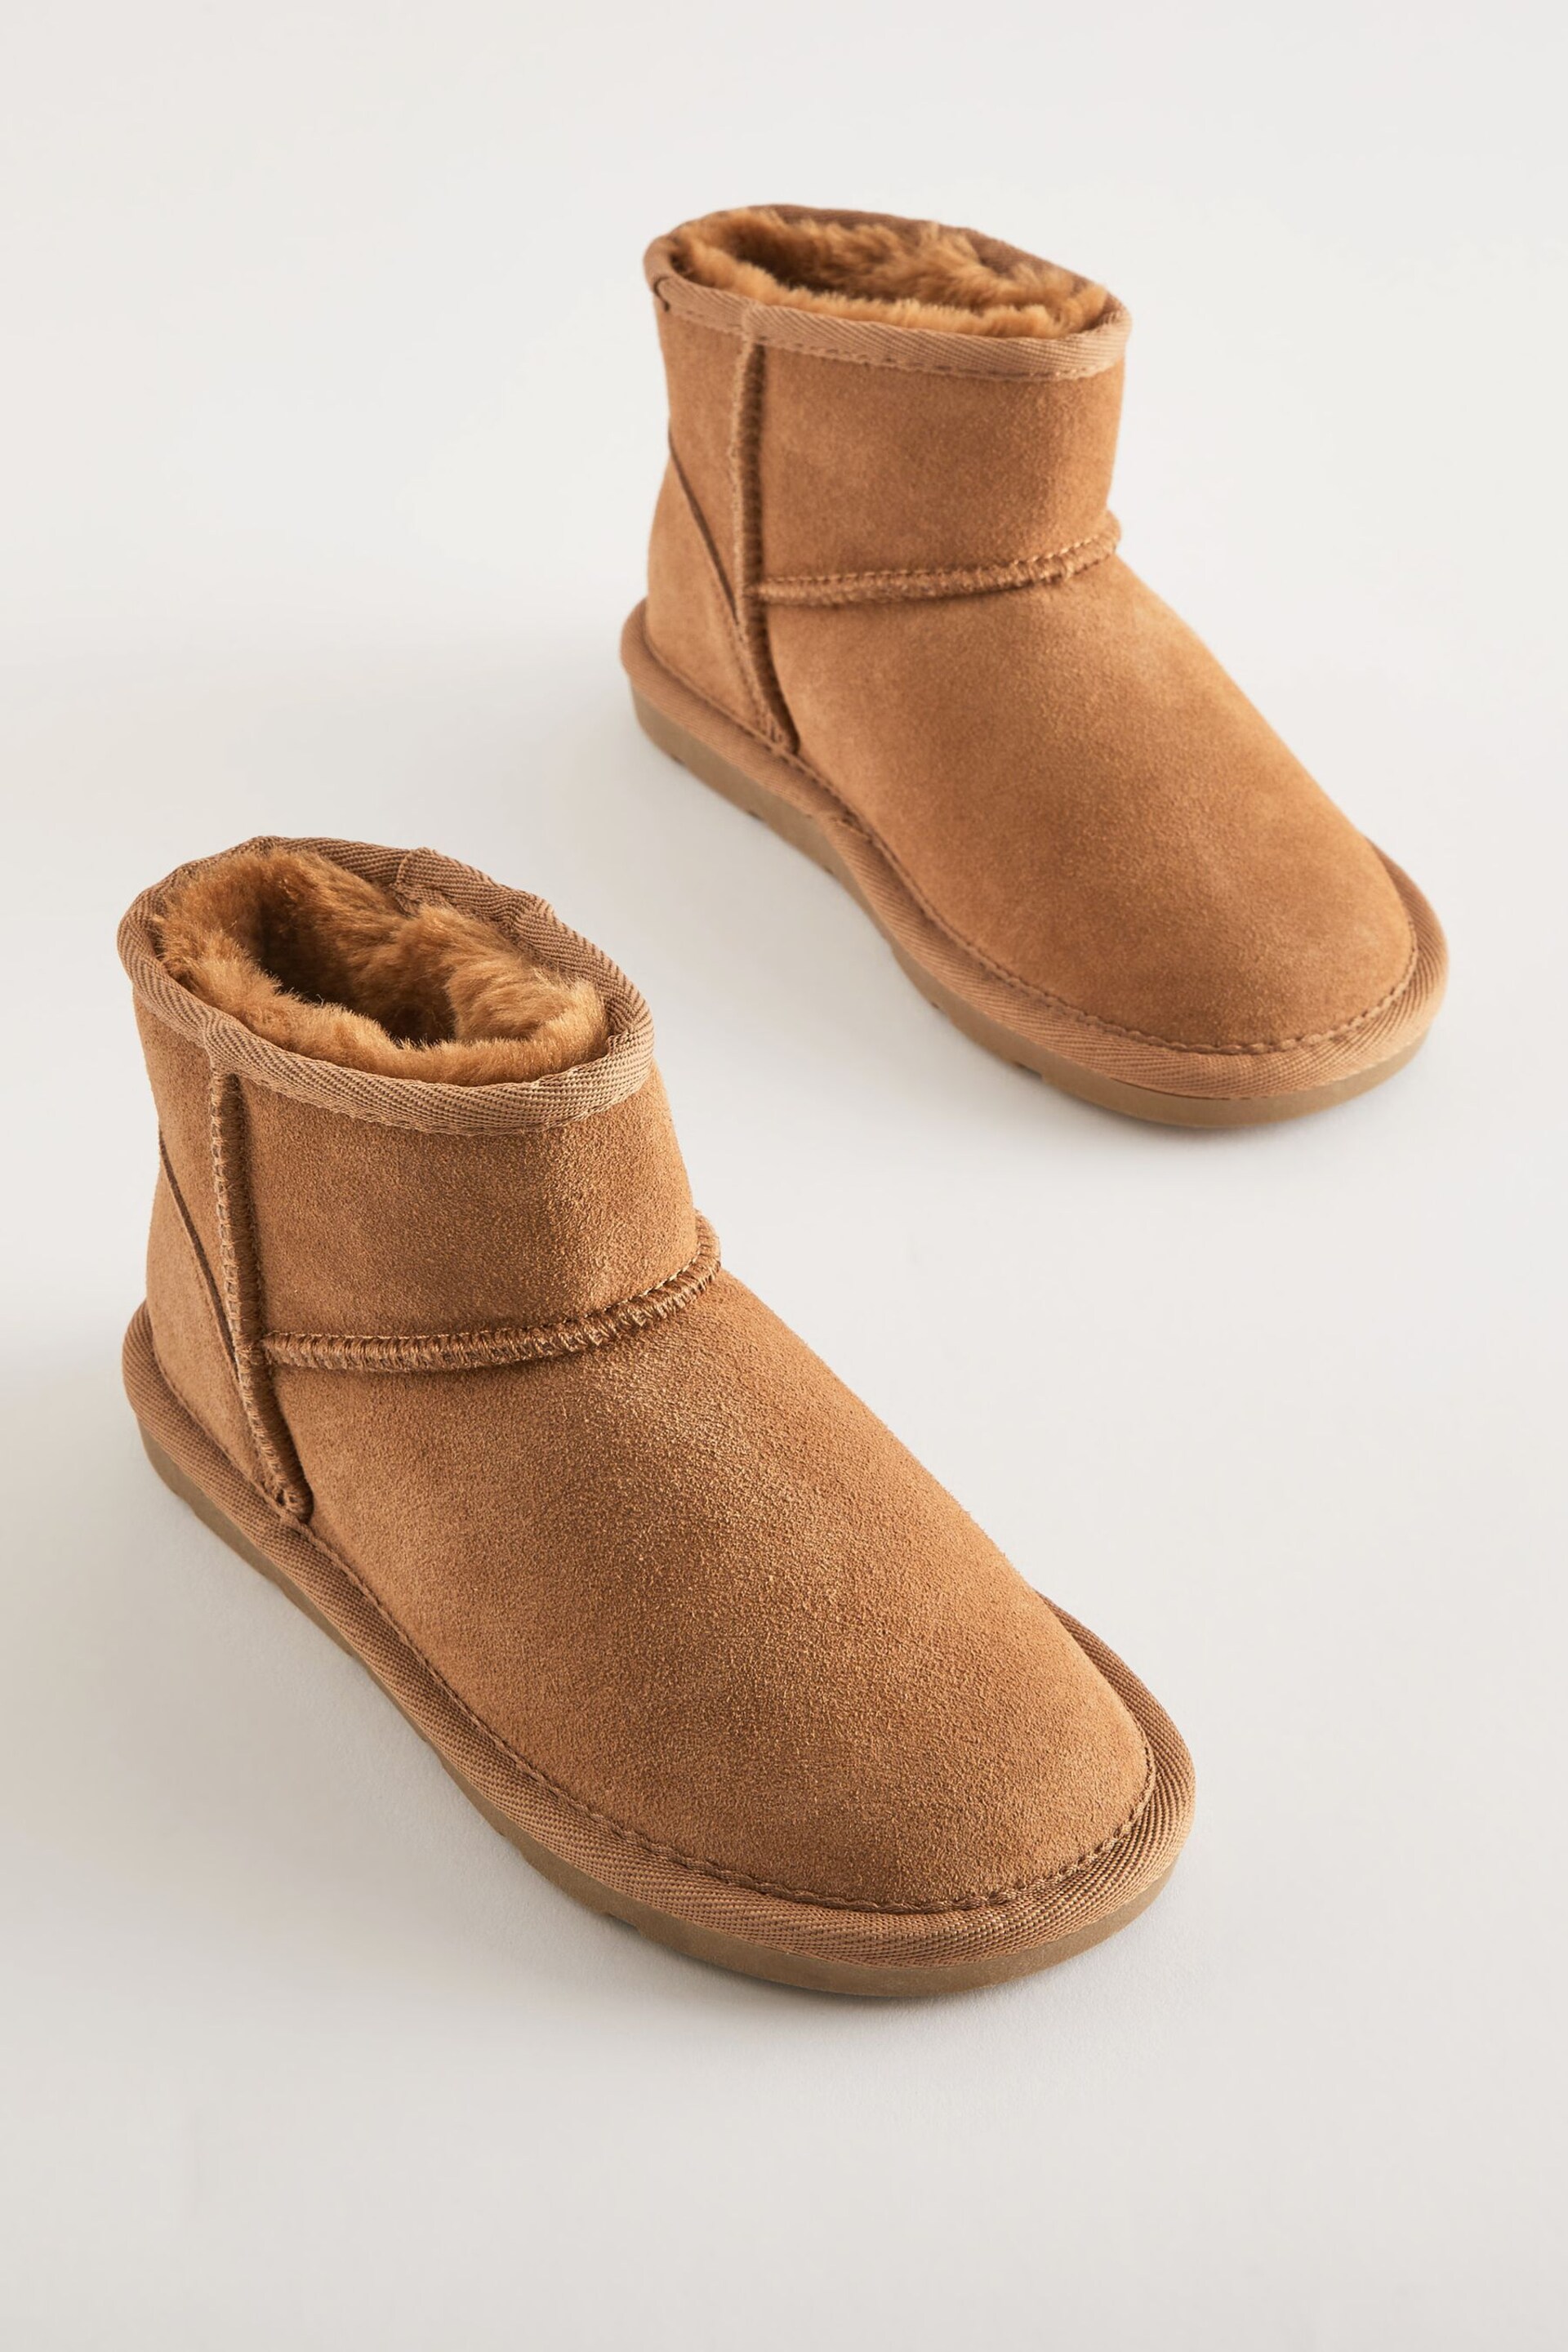 Tan Brown Short Warm Lined Water Repellent Suede Pull-On Boots - Image 5 of 9